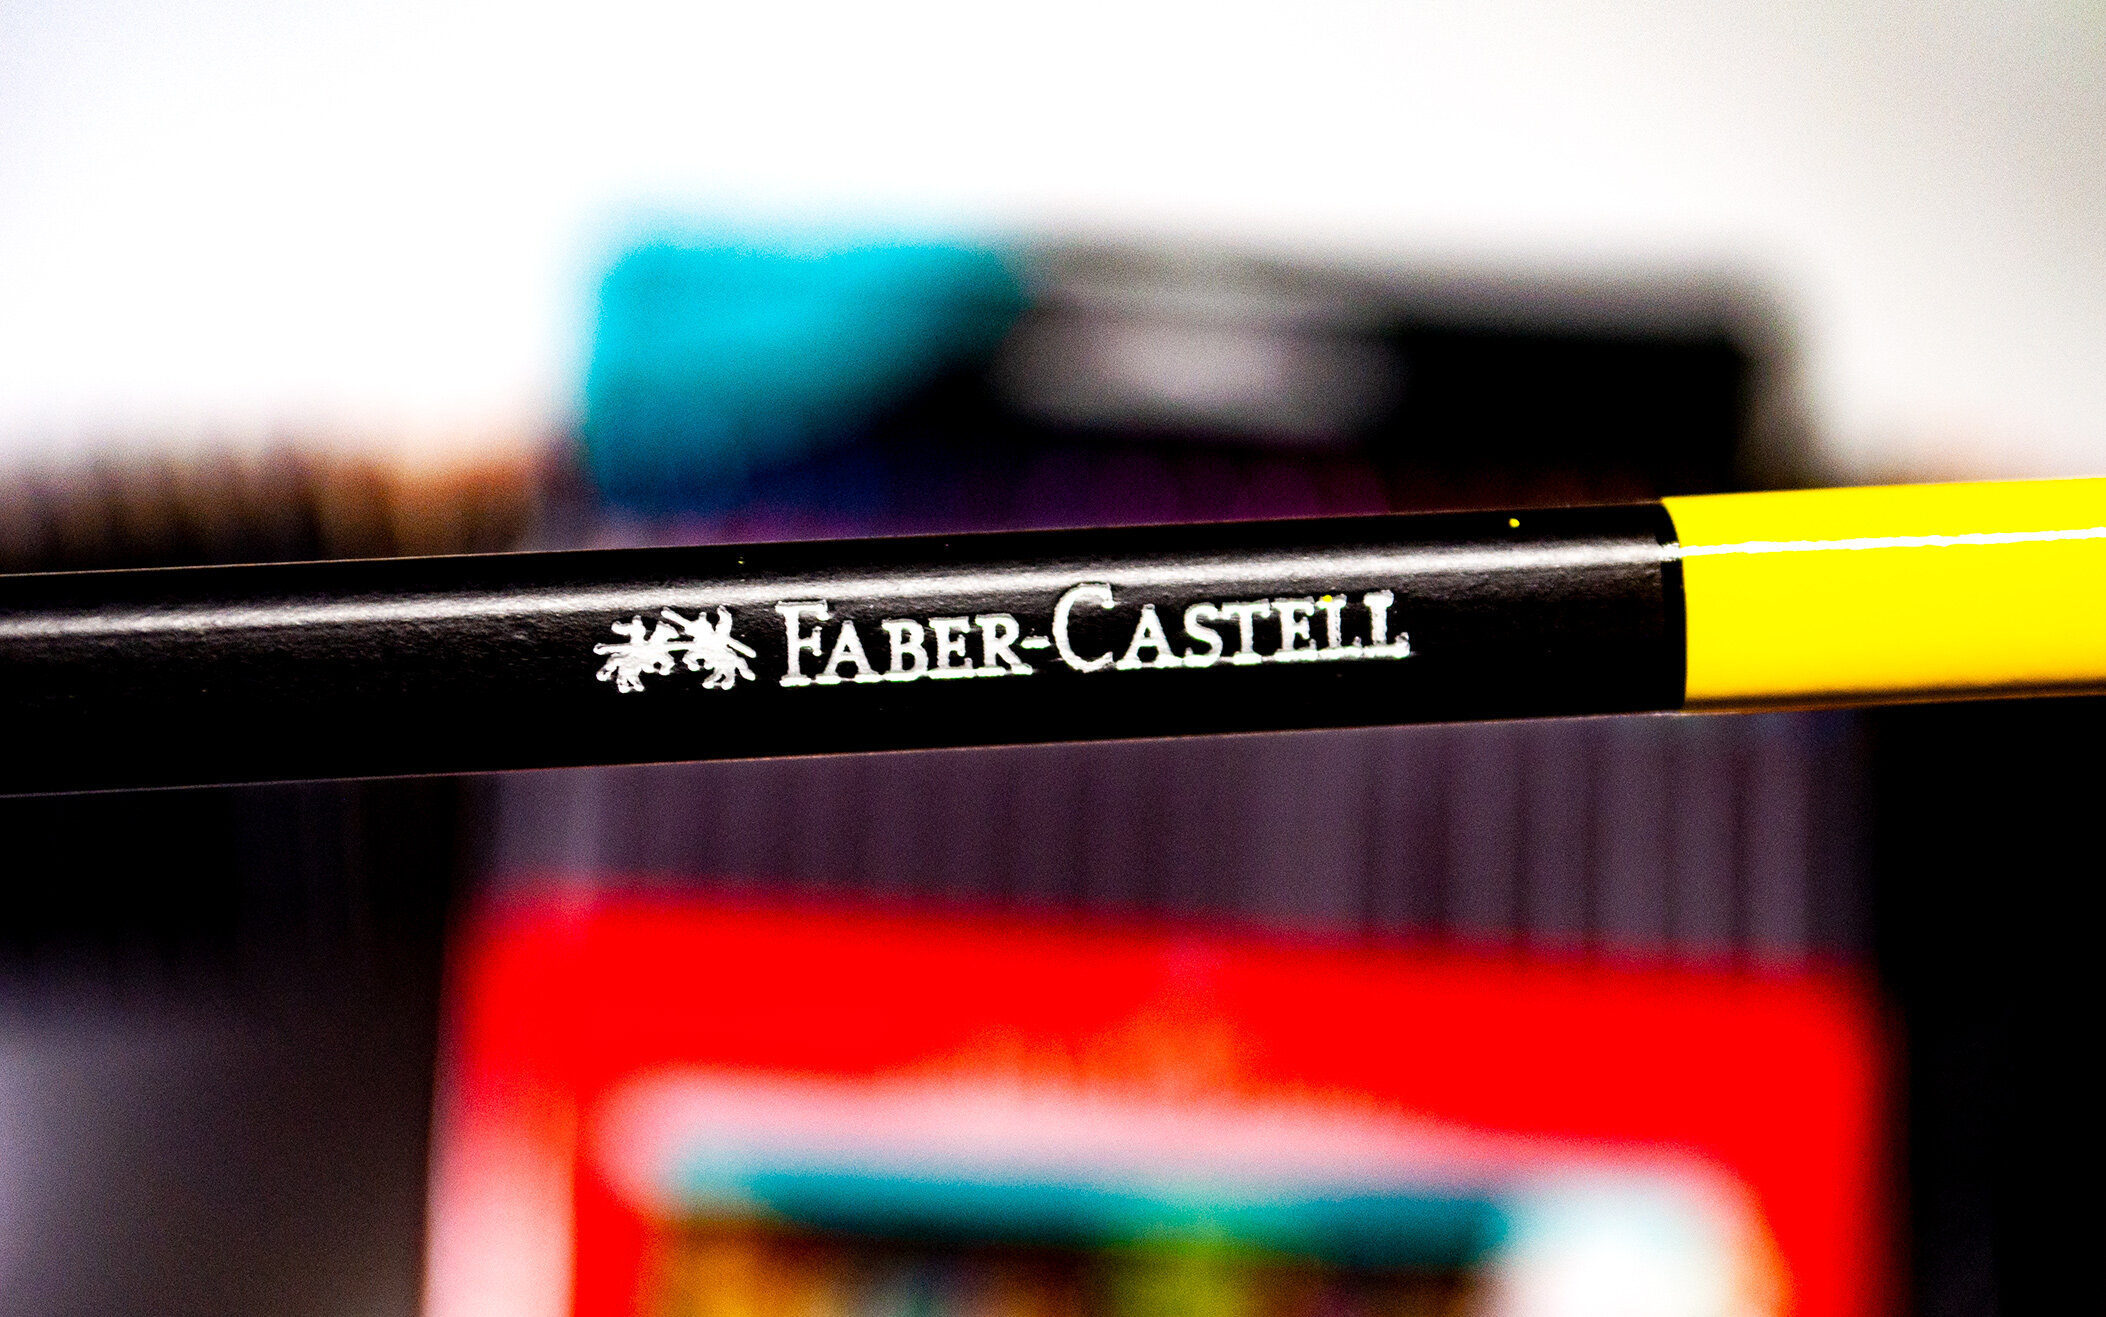  Faber-Castell Black Edition Colored Pencils - 36